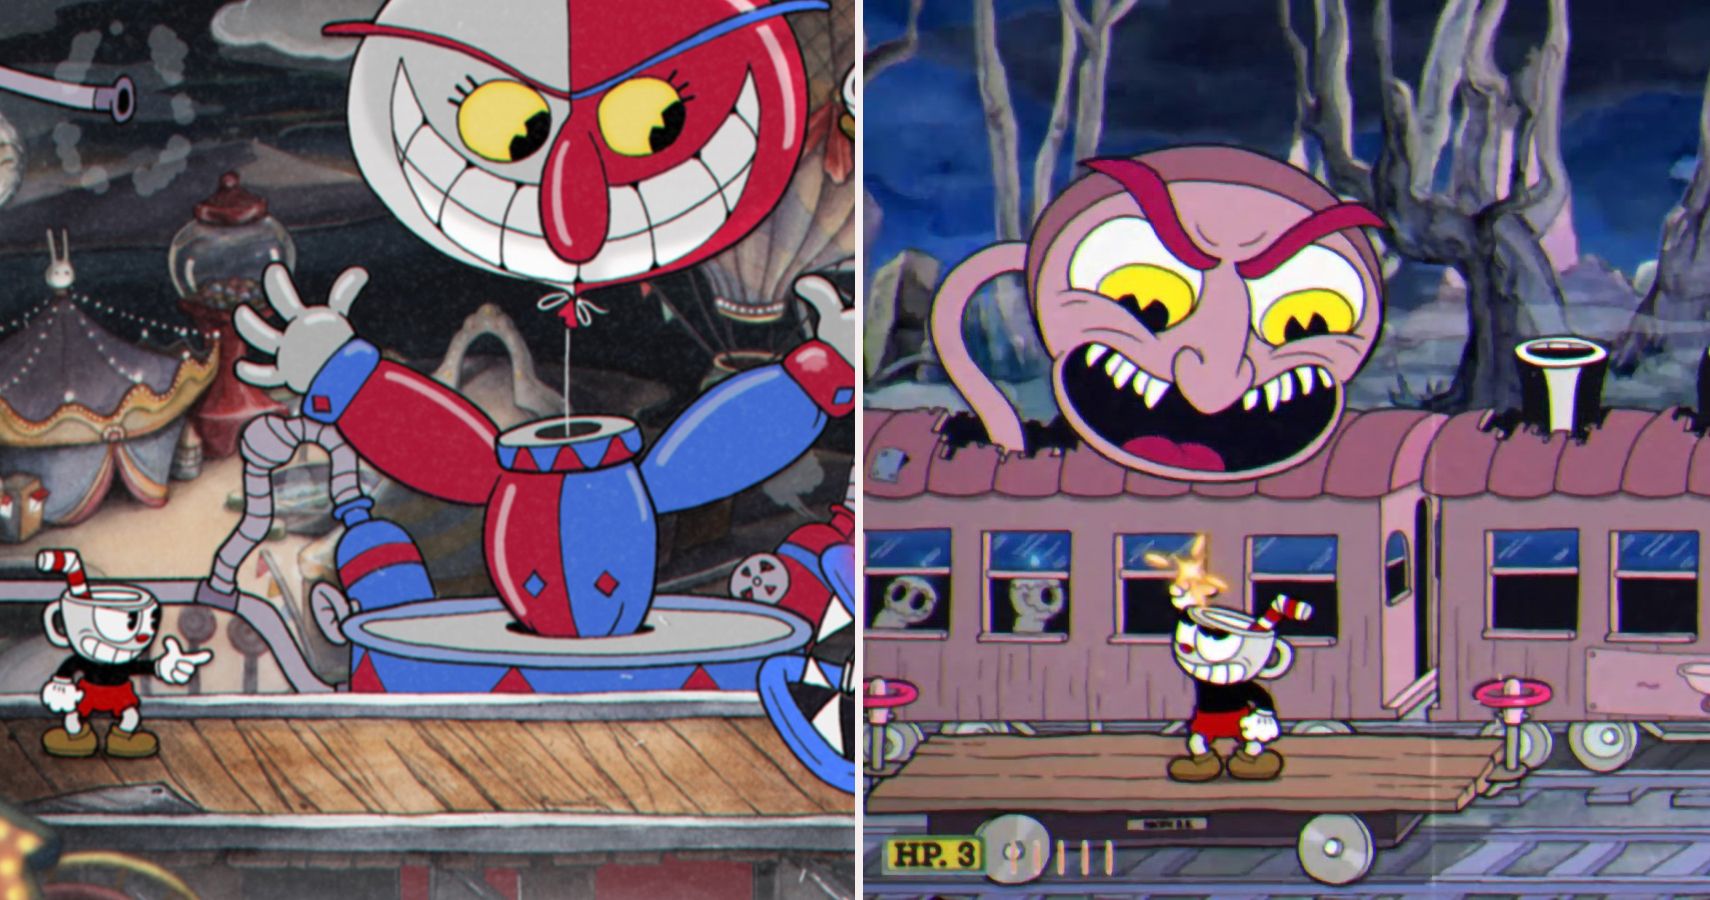 Cuphead The 10 Hardest Bosses In The Game How To Beat Them Easily